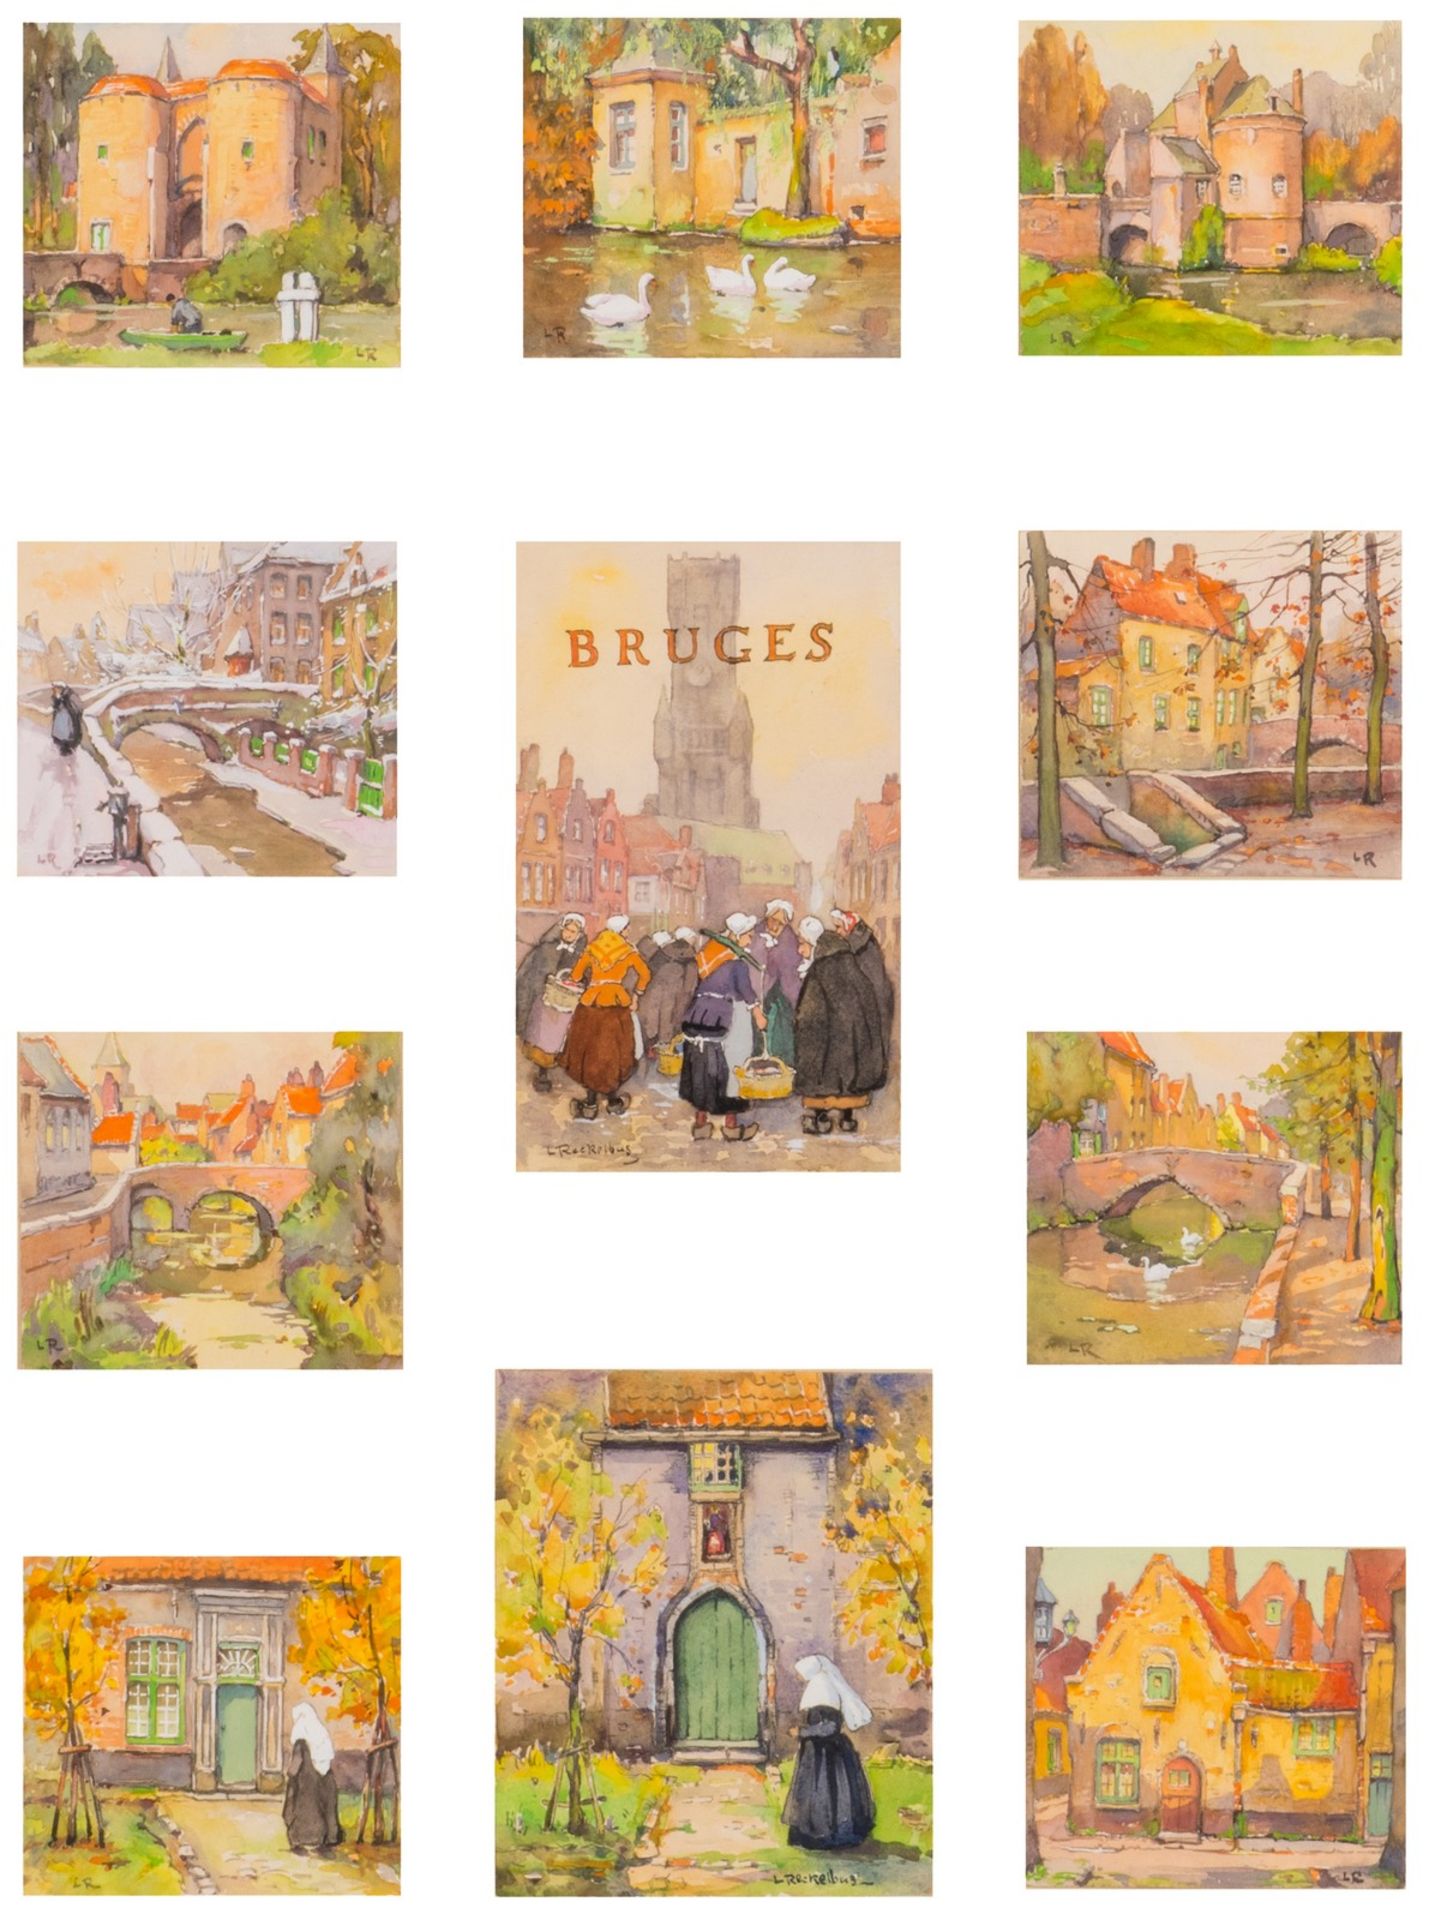 Reckelbus L., a design for a series Bruges tourist greeting cards, water colour, 9 cards 11 X 12,5